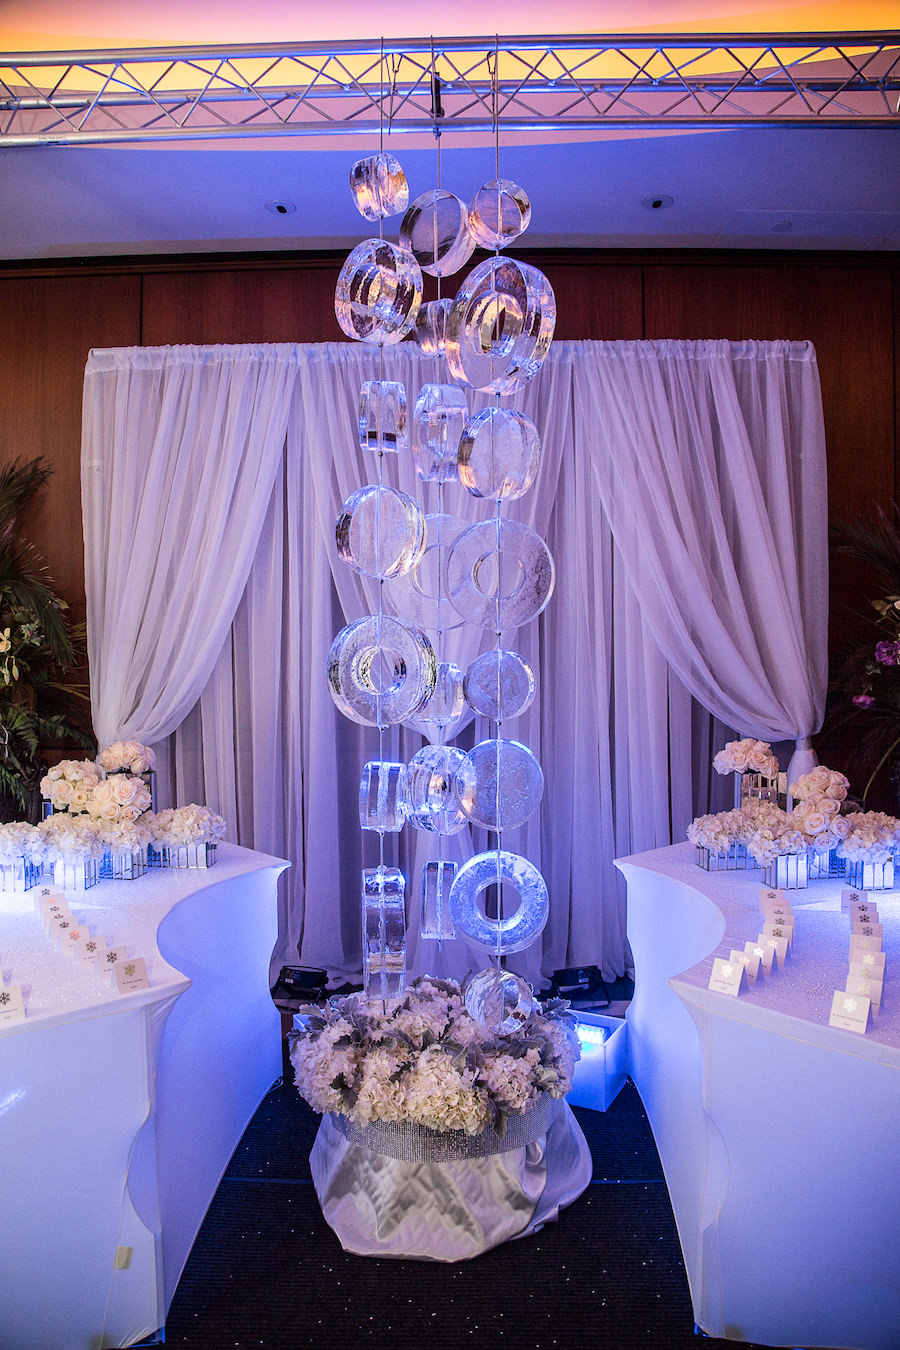 Indoor, Winter Wonderland Wedding Reception Decor with Ice Sculpture, Draping and Ivory Floral Decor | Tampa Wedding Planner UNIQUE Weddings and Events